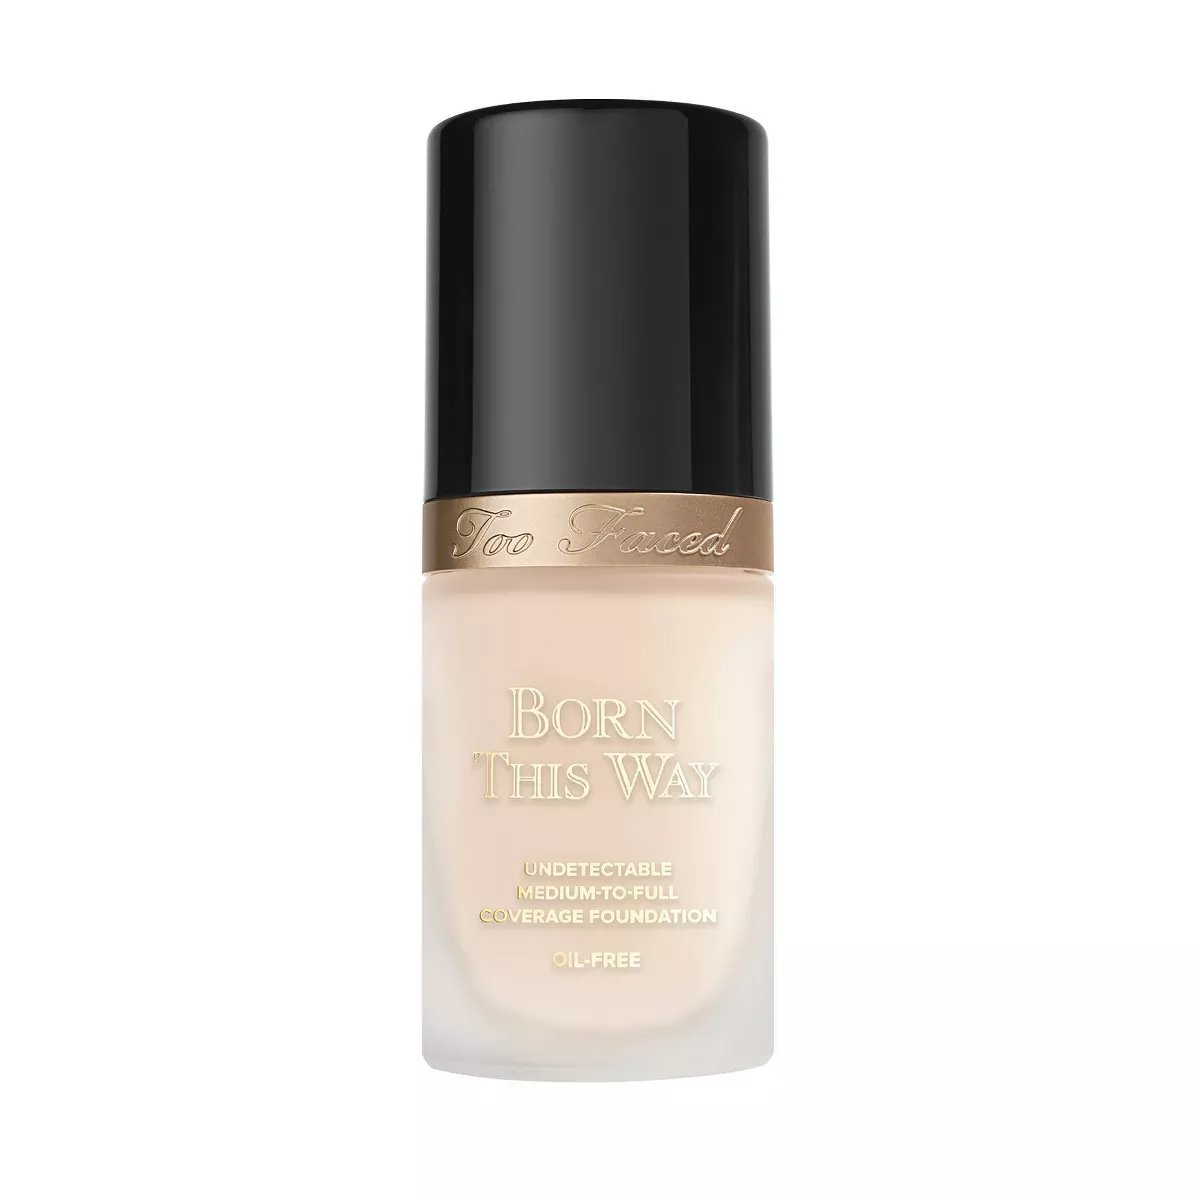 Too Faced born this way undetectable medium-to-full coverage foundation Cloud 30m - AllurebeautypkToo Faced born this way undetectable medium-to-full coverage foundation Cloud 30m